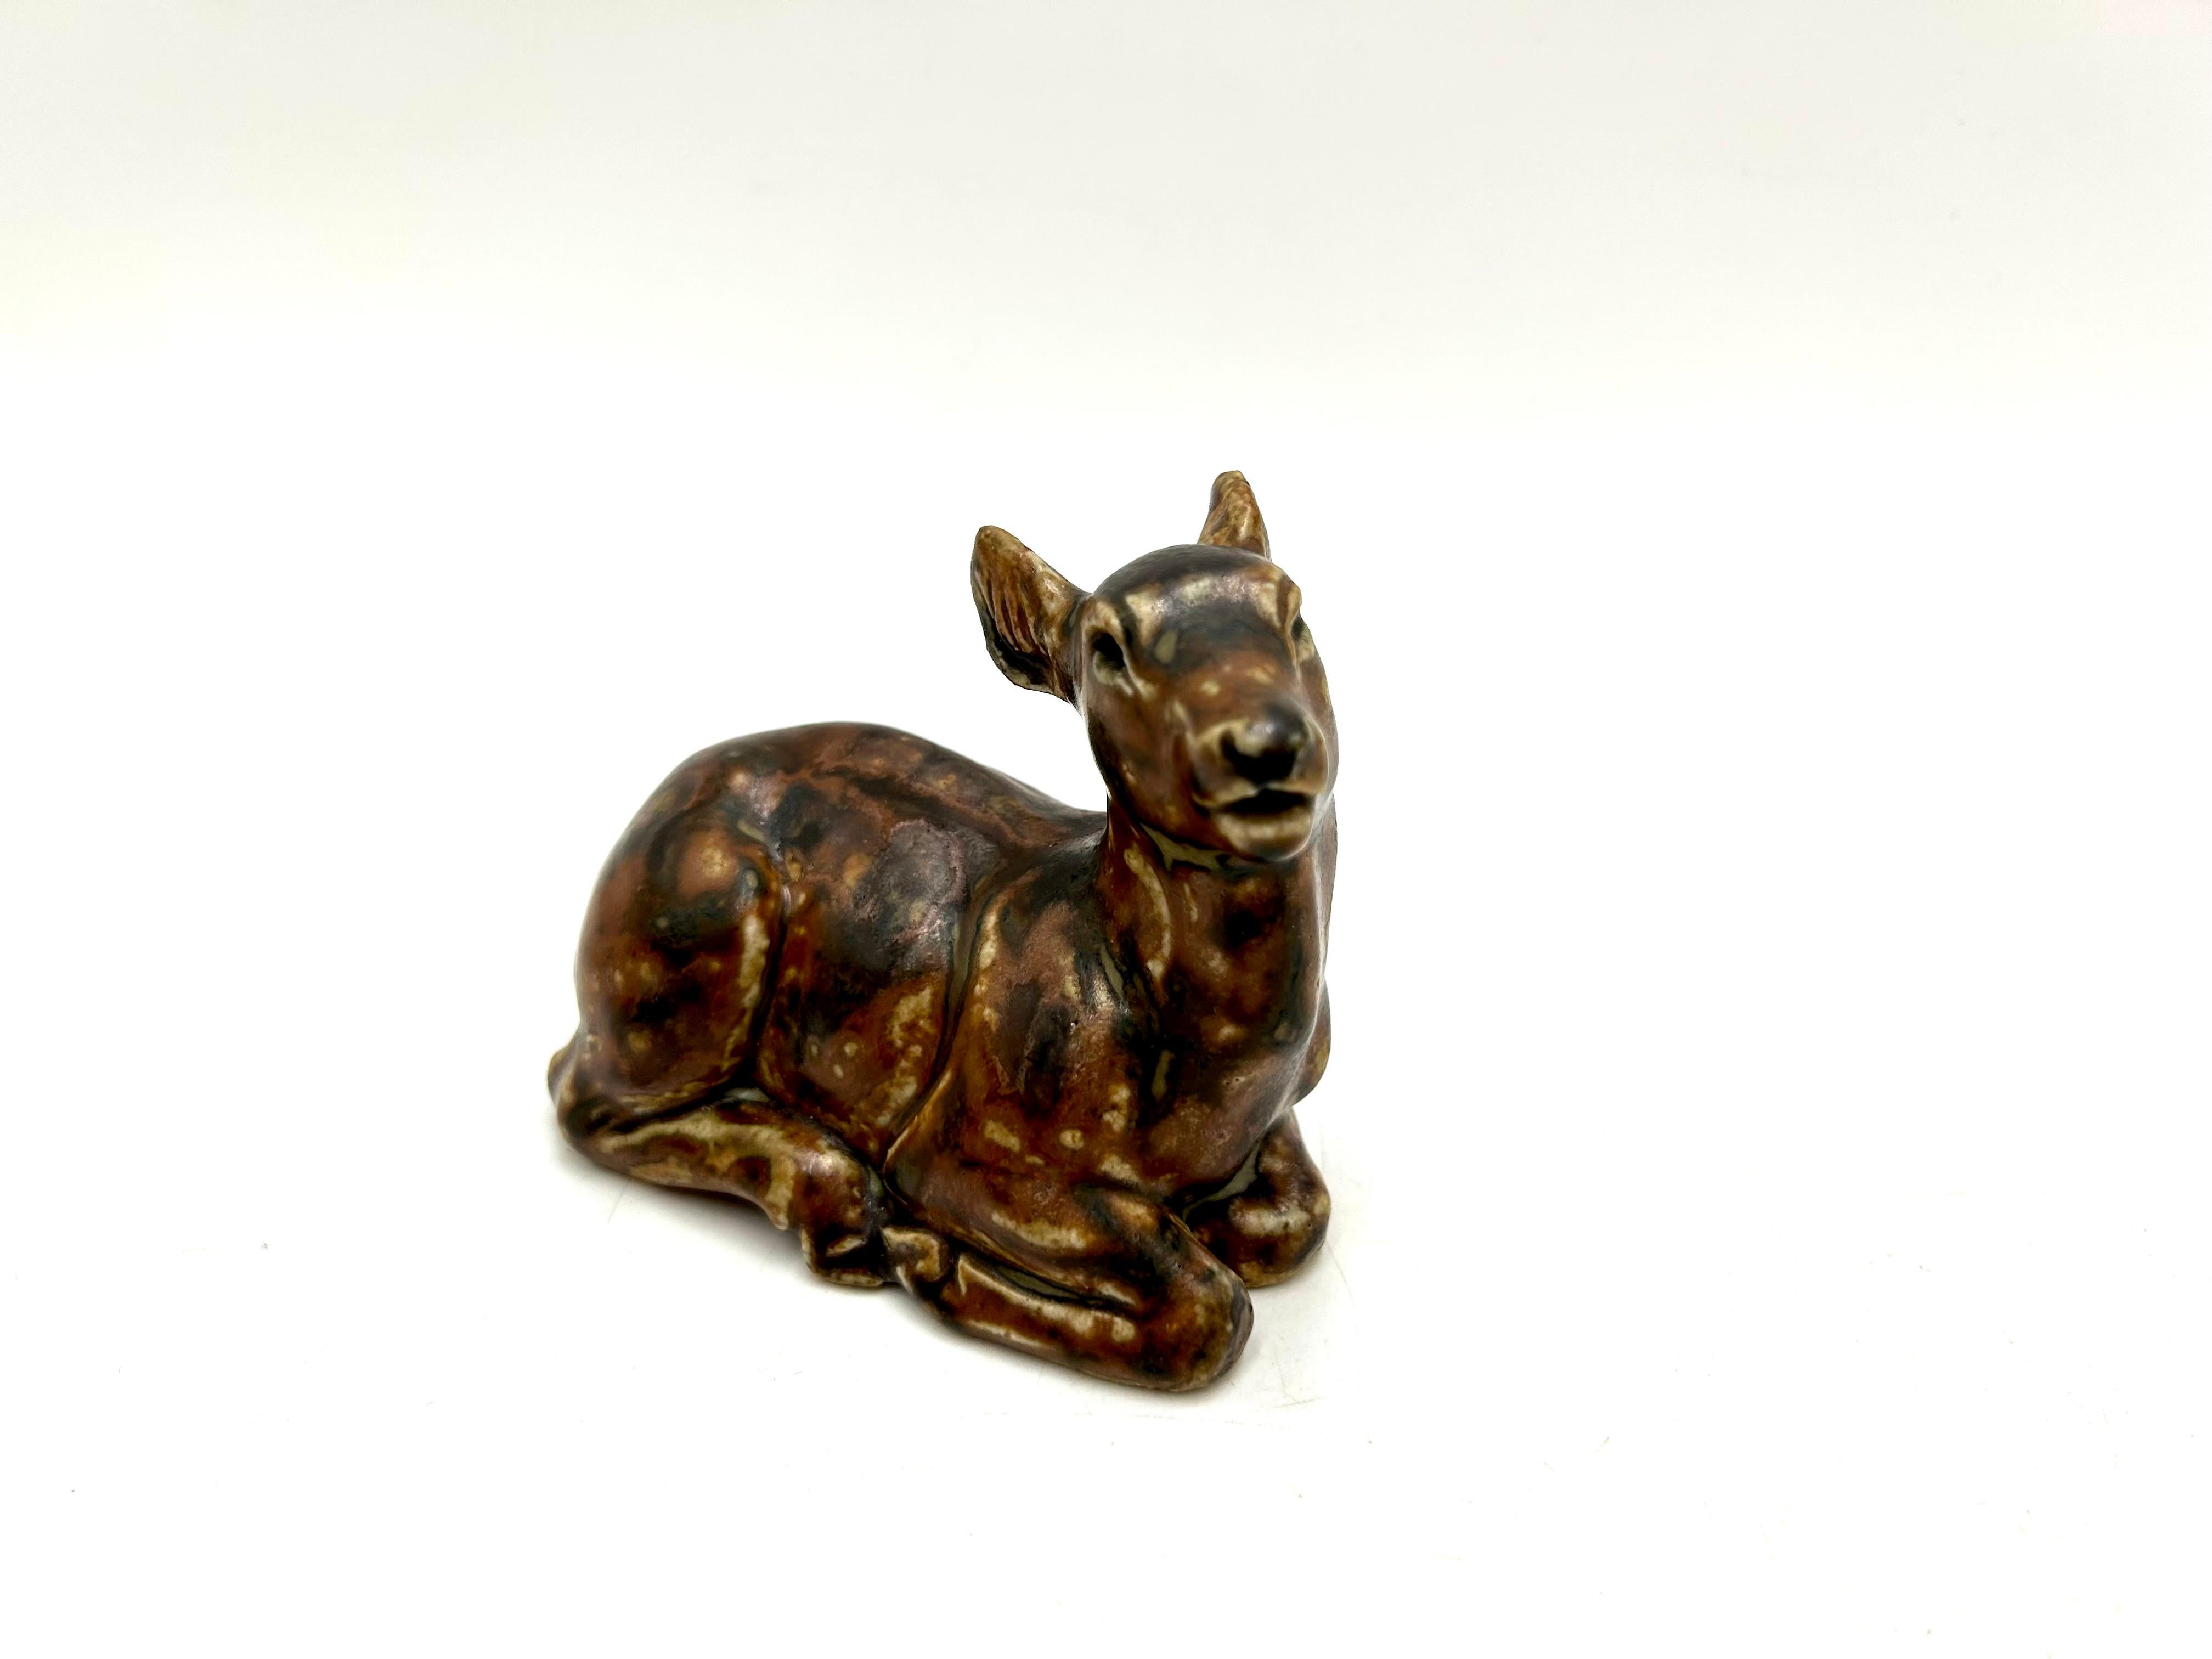 Ceramic deer figurine, made of stoneware, designed by Knud Kyhn

Made in Denmark by Royal Copenhagen.

Very good condition, no damage.

height 8cm, width 10cm, depth 5cm